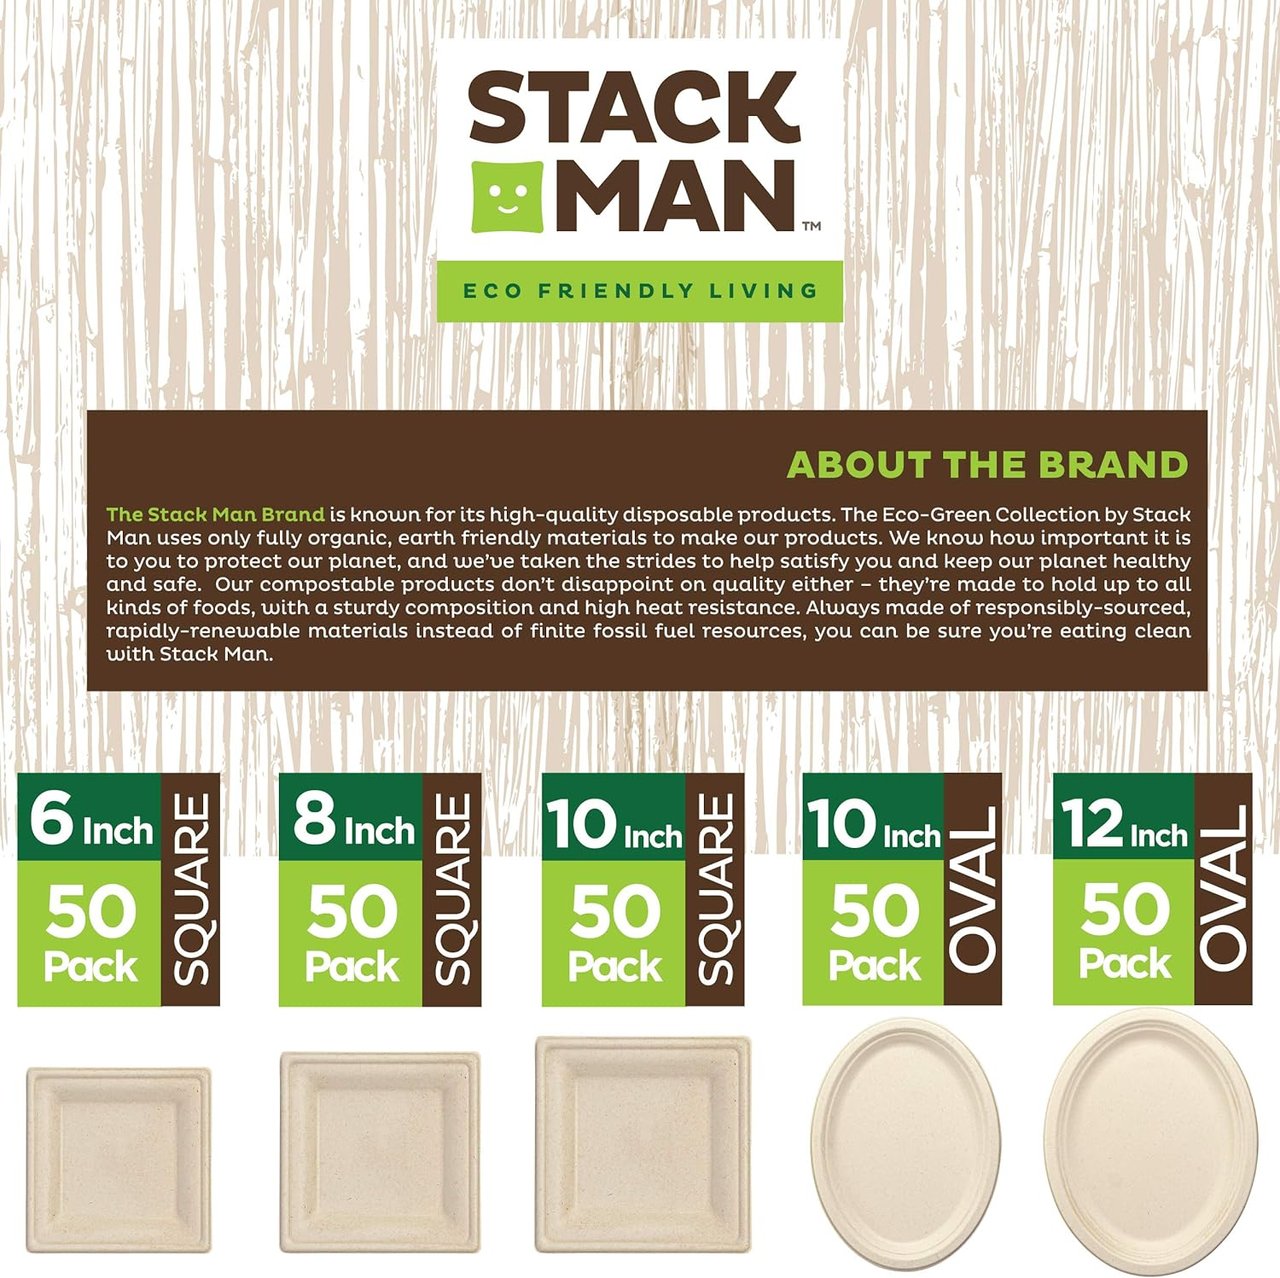 7 100% Compostable 9 Inch Paper Plates [125-Pack] Heavy-Duty Plate, Natural Disposable Bagasse Plate, Eco-Friendly Made of Sugarcane Fibers - Natural Unbleached Brown 9" Biodegradable Plate by Stack Man